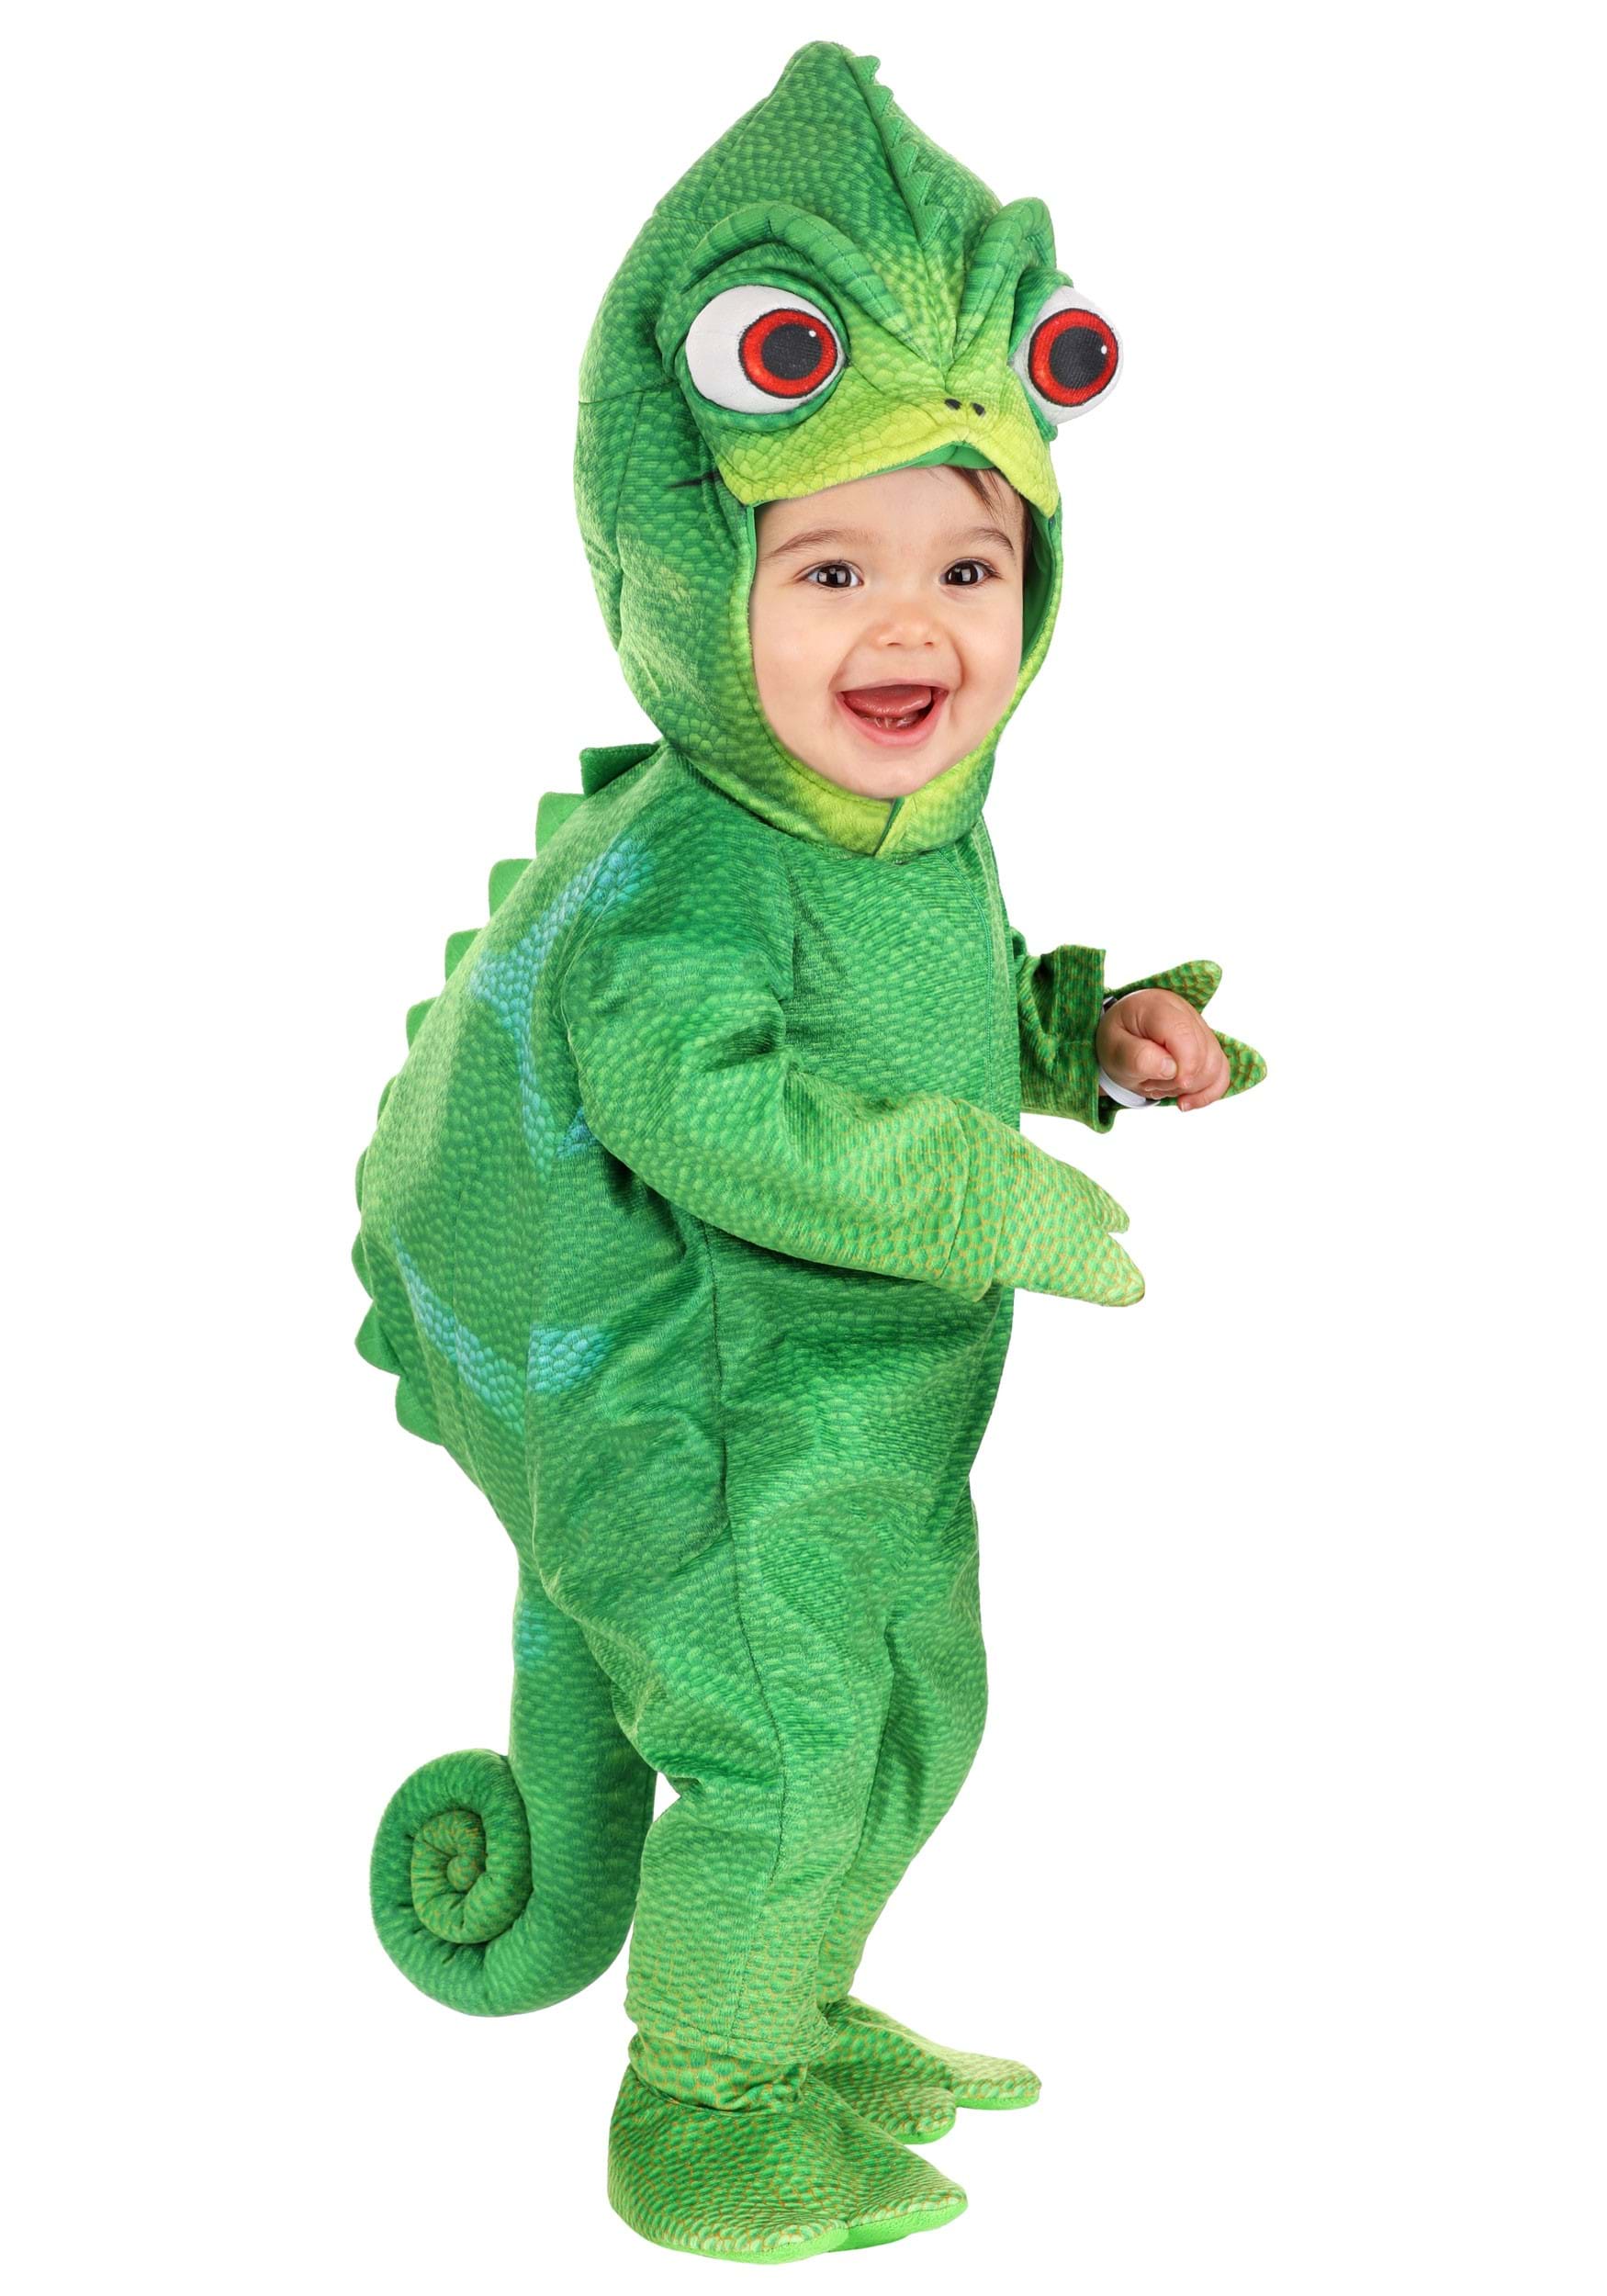 Photos - Fancy Dress Disney FUN Costumes  Tangled Pascal Costume for Infants Green/White FUN 